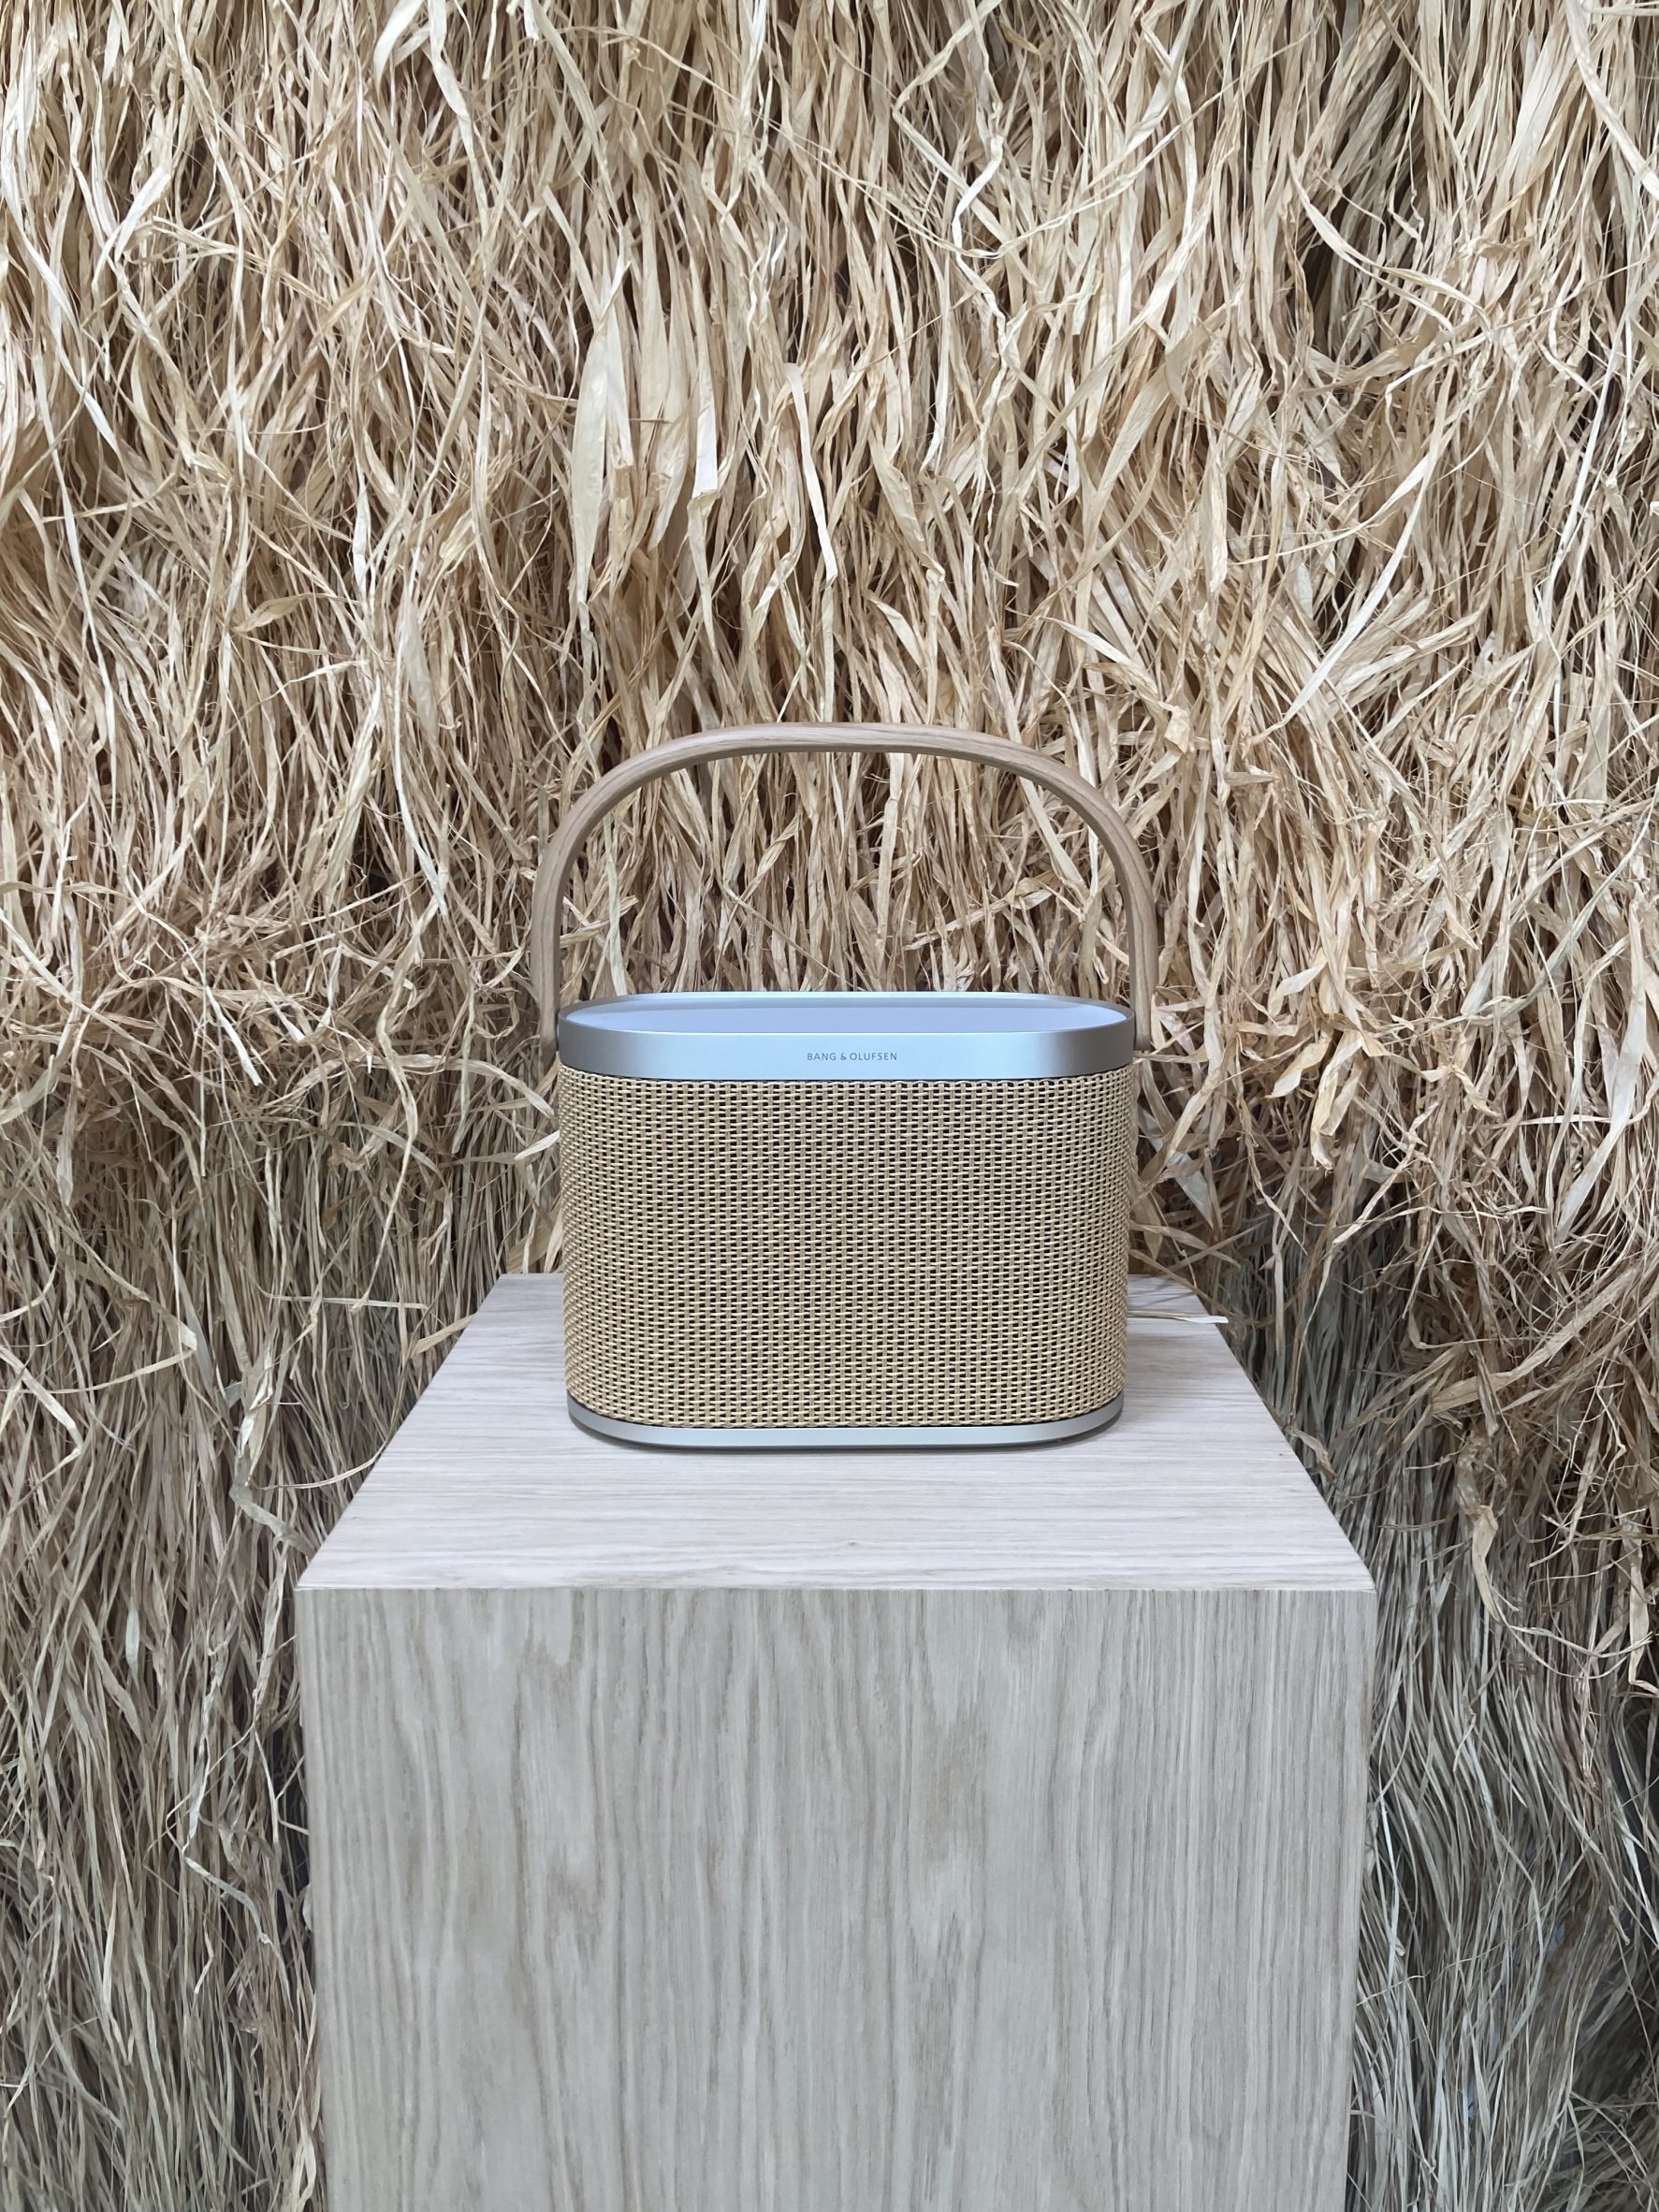 Beosound A5 features modular covers made from paper raffia and oak lamellas